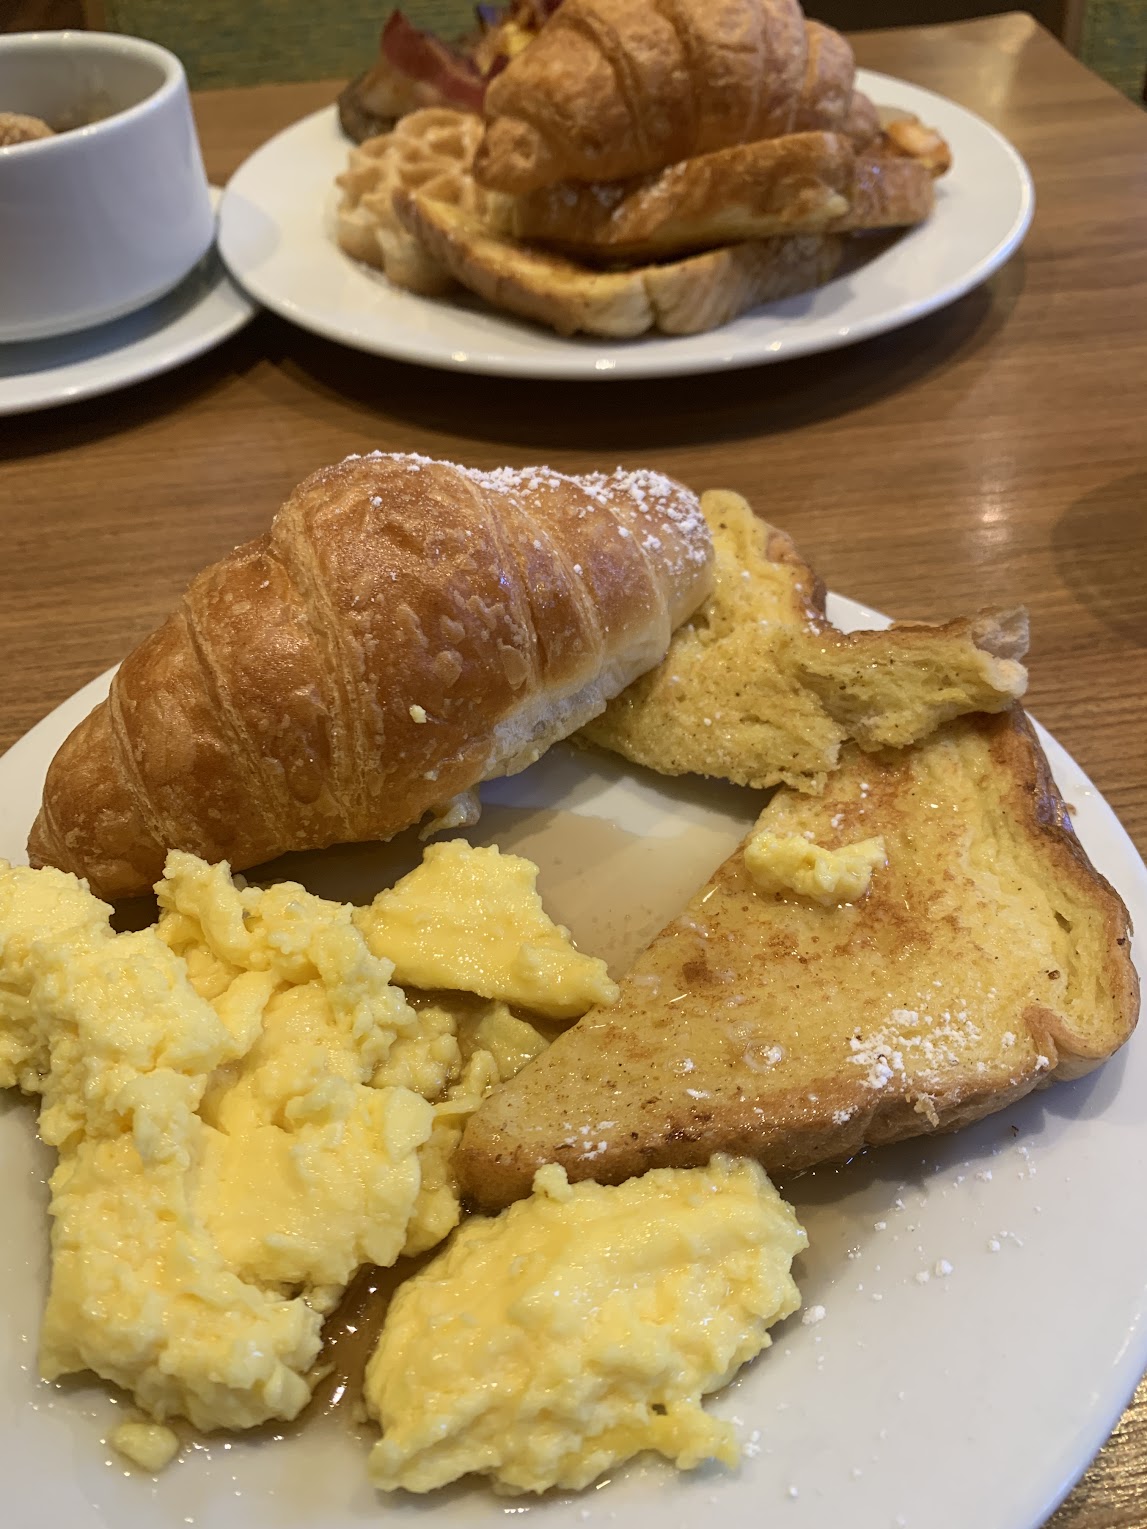 Breakfast plate consisting of french toast, scrambled eggs, and a croissant on the cruise ship.